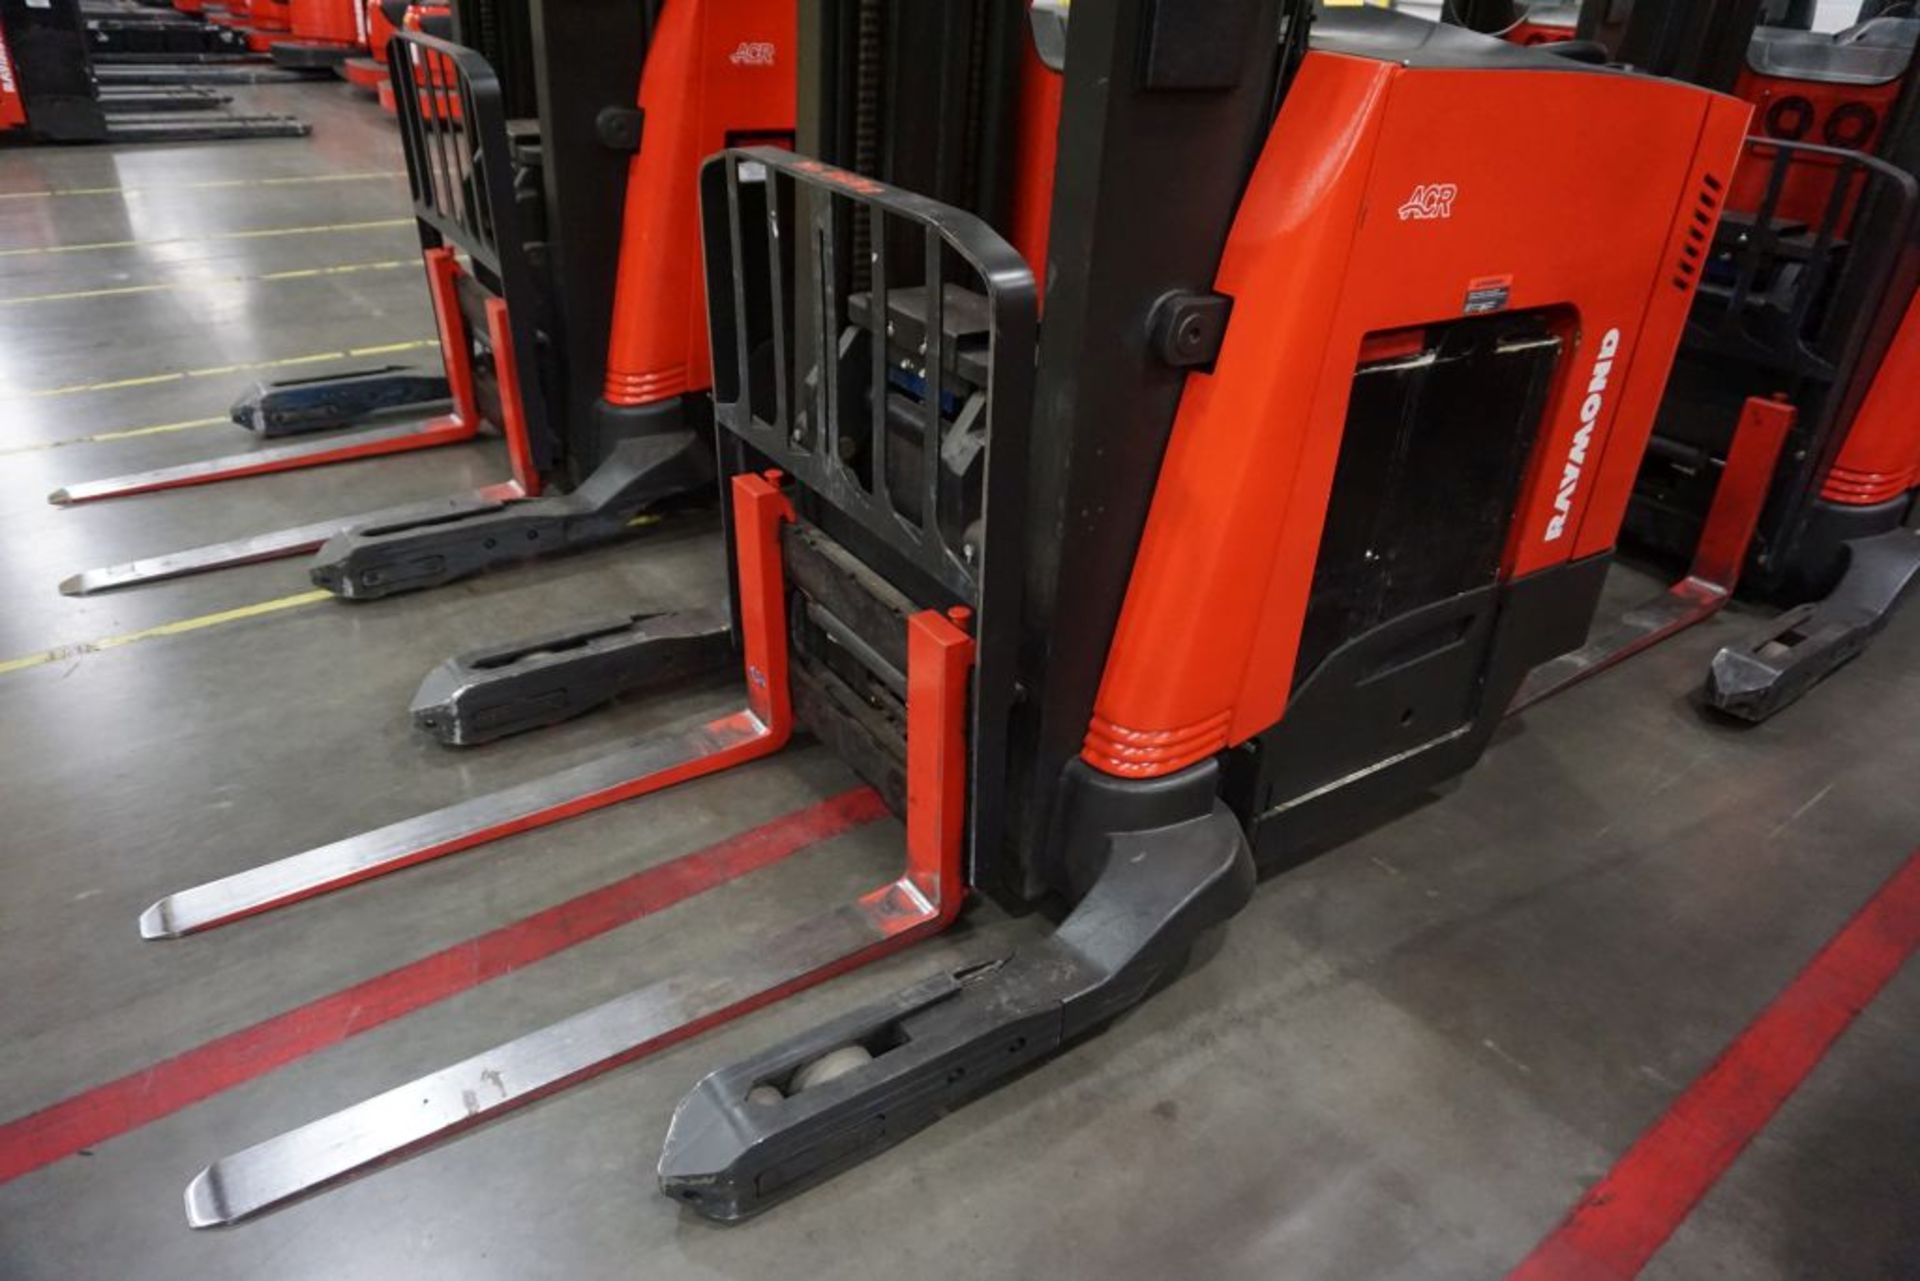 Raymond 7500 Universal Stance Reach Forklift - Model No. 750-R45TT; Serial No. 750-15-BC50725; - Image 2 of 19